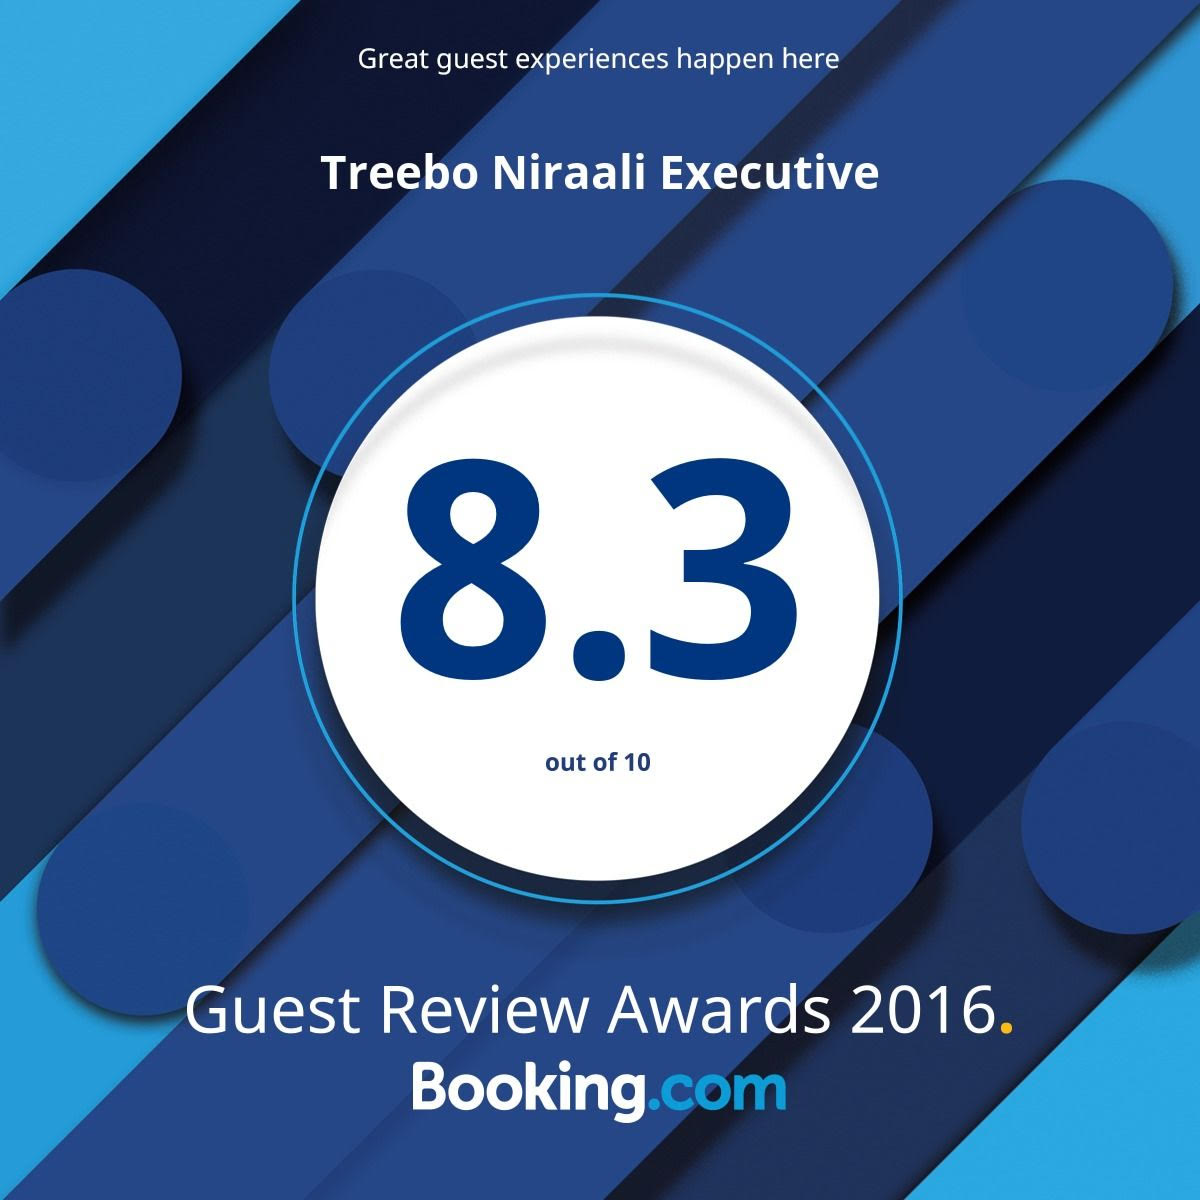 Booking.com Guest Review Awards